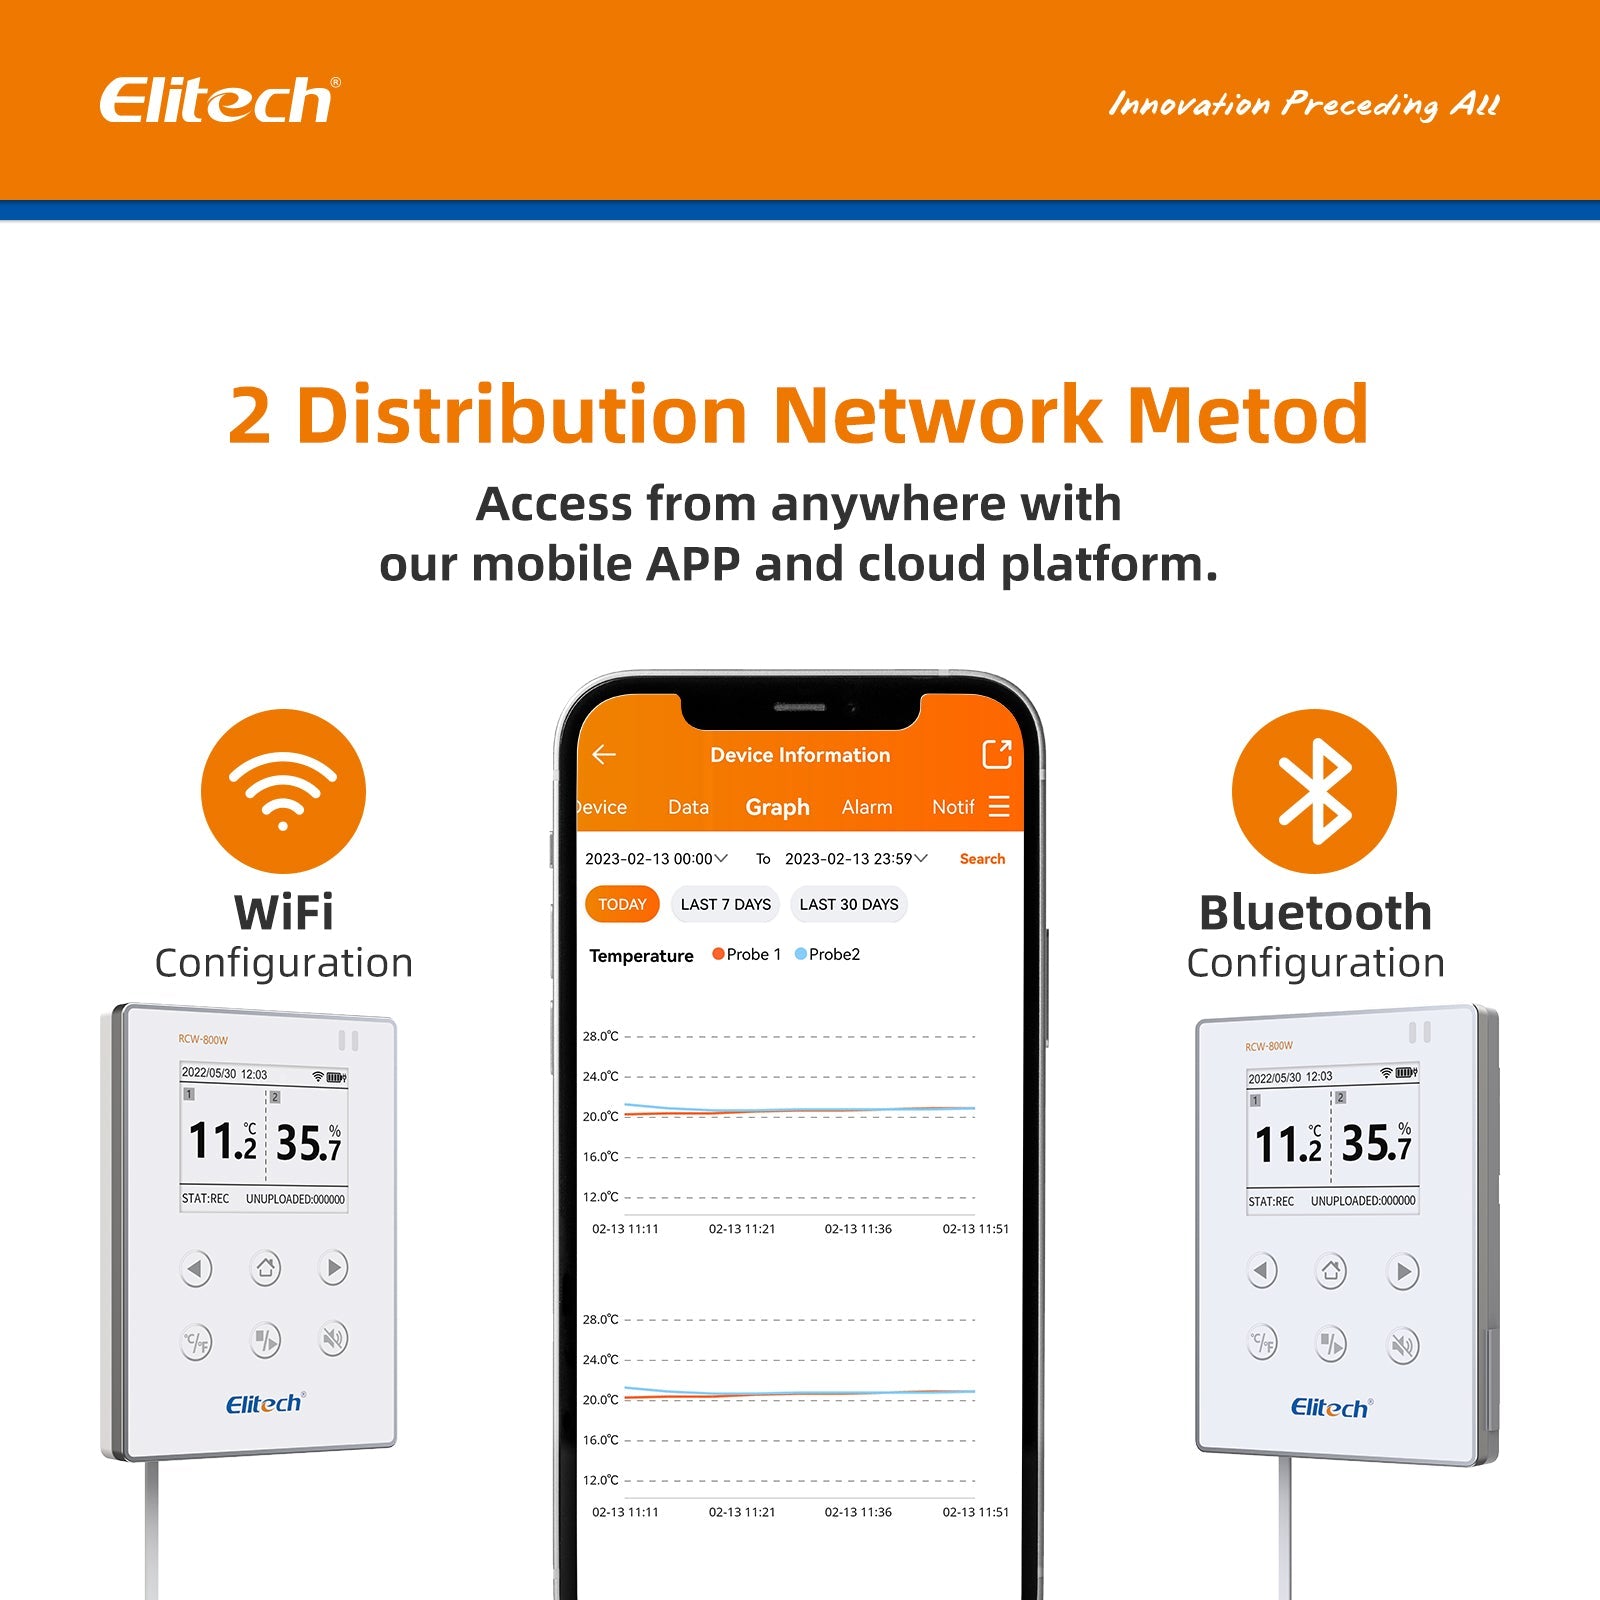 Elitech Temperature Humidity Data Logger WiFi Recorder Cloud Storage Wirelesss Remote Monitor, RCW-800W-THE - Elitech Technology, Inc.